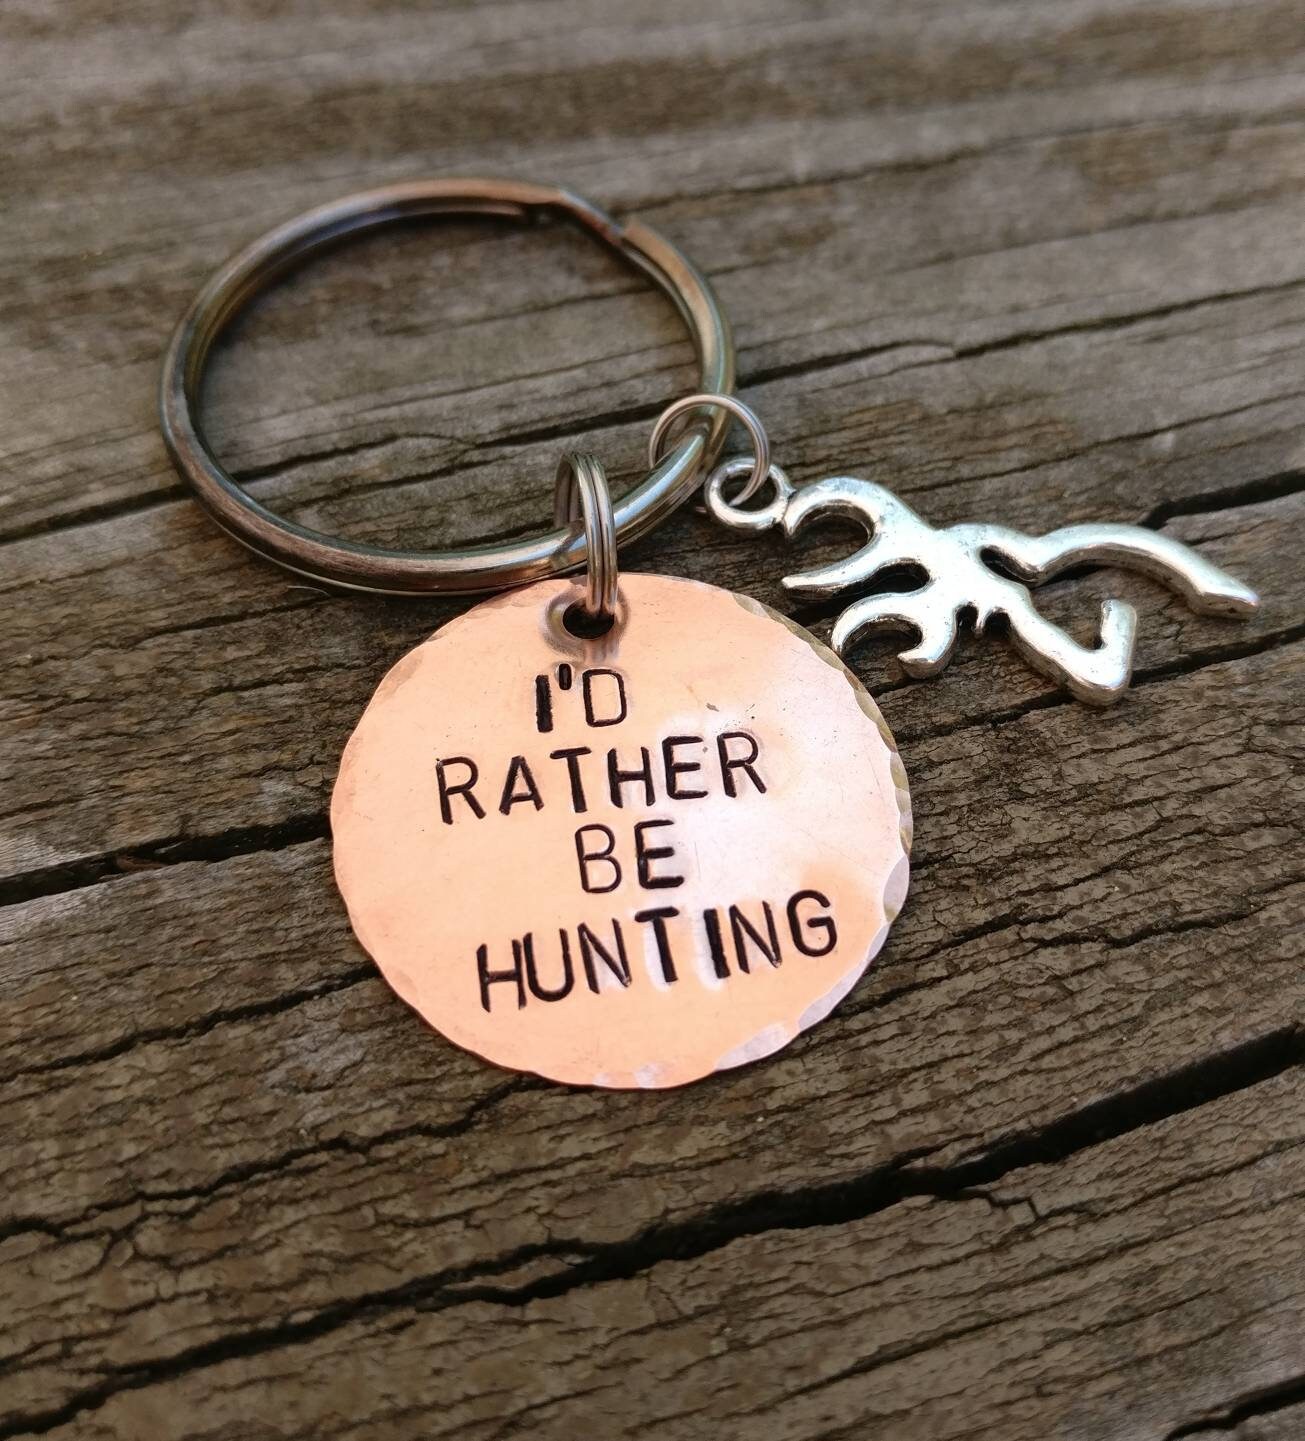 GIFT FOR DAD - Father's Day Gift, Hunting Gift, Hunting Gift, Hunting Keychain, Gift for Dad, Gift for Grandpa, Birthday gift